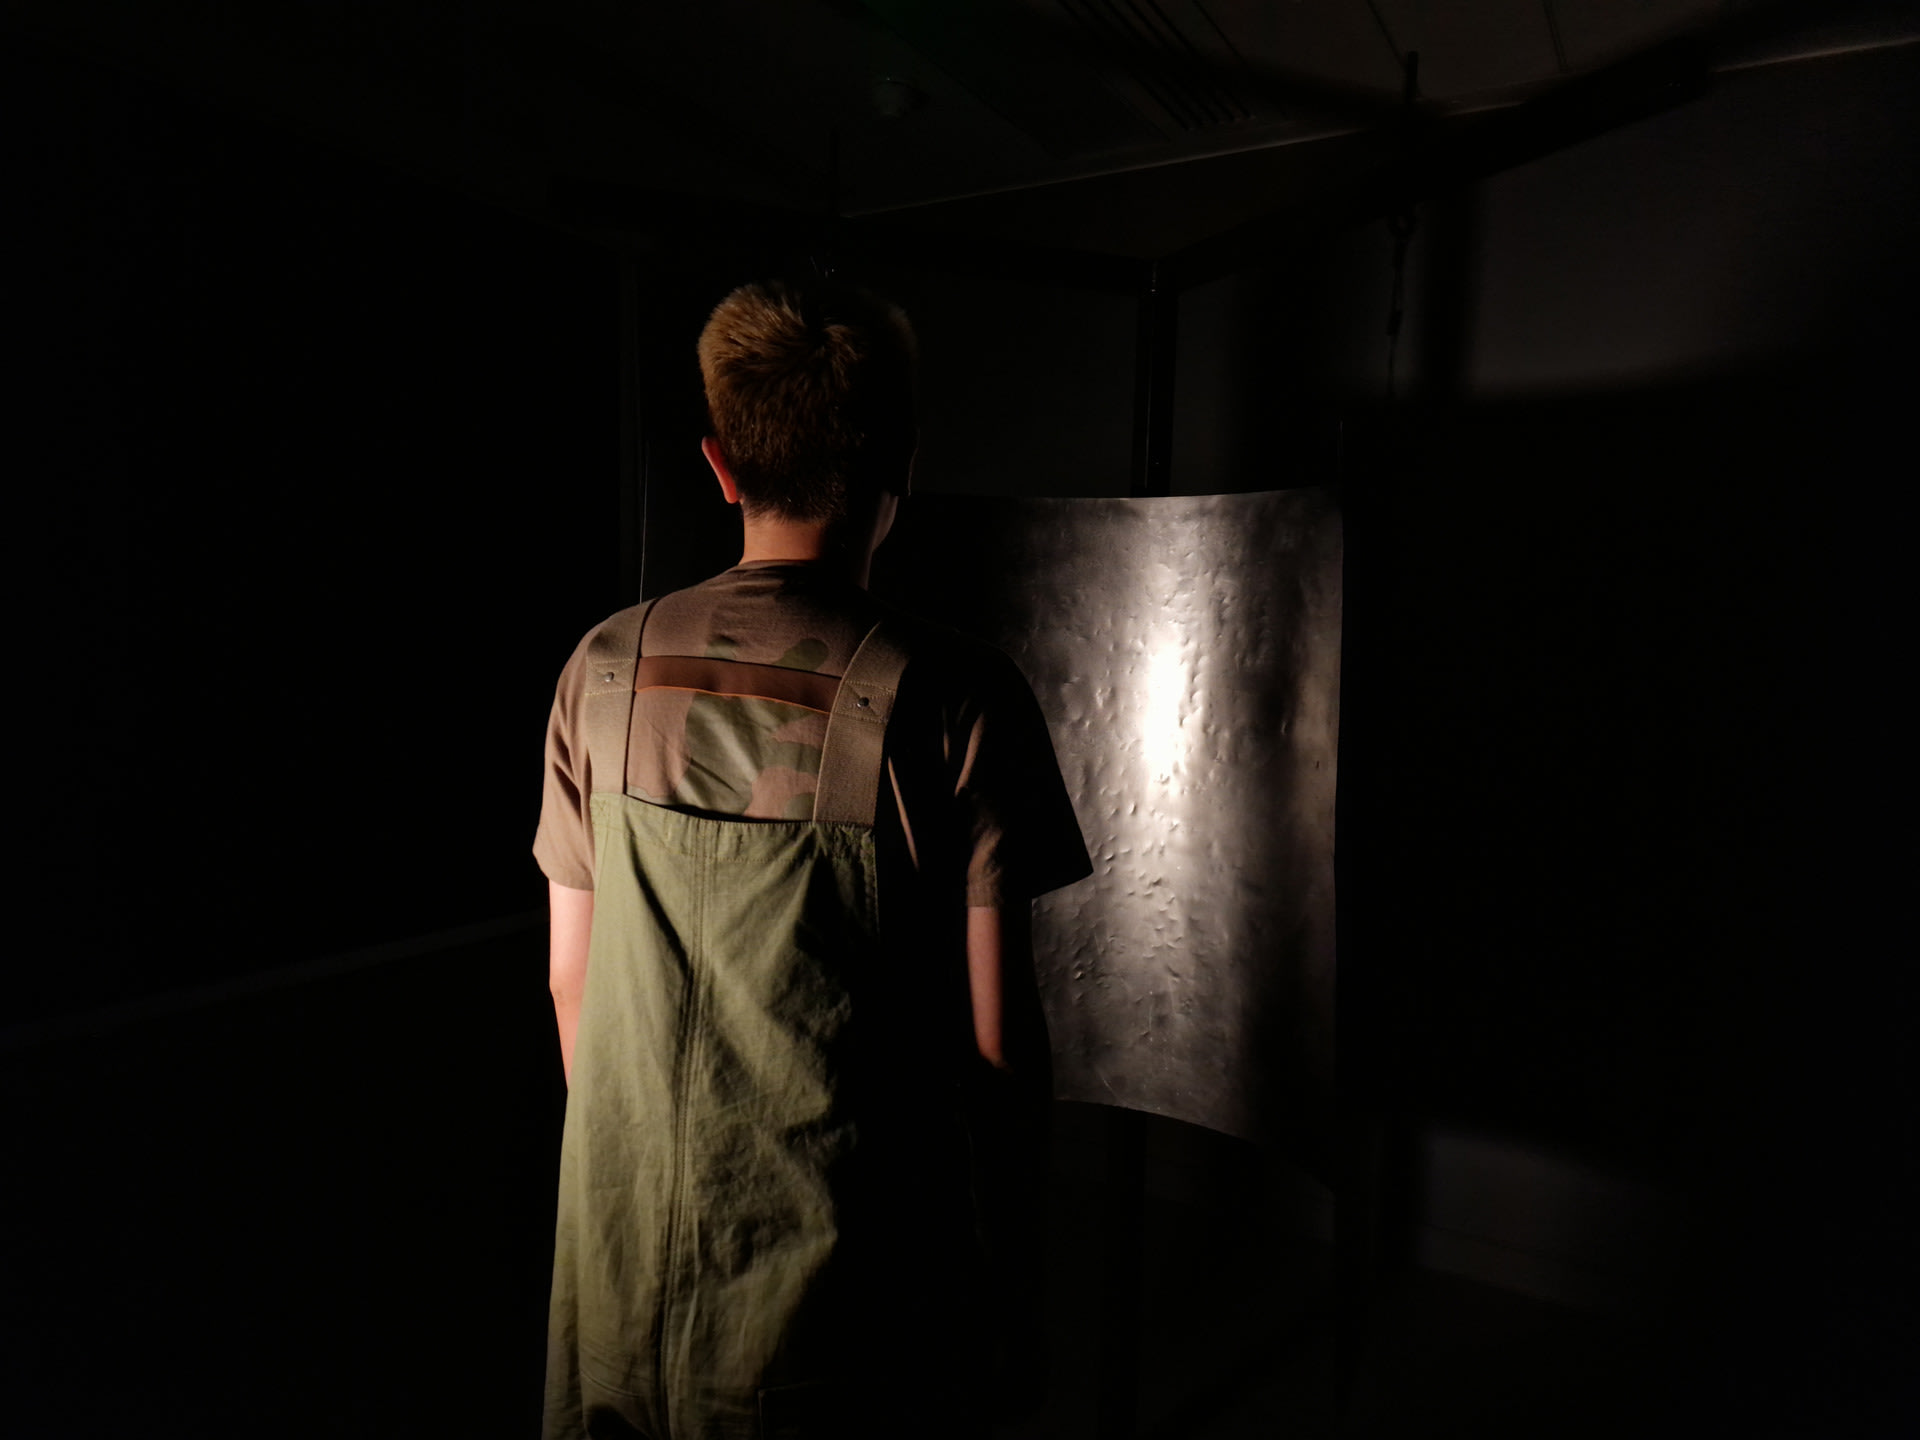 Photograph of a partially lit person, with their back to the camera, stood in front of a dented metal panel, in a completely dark background. 